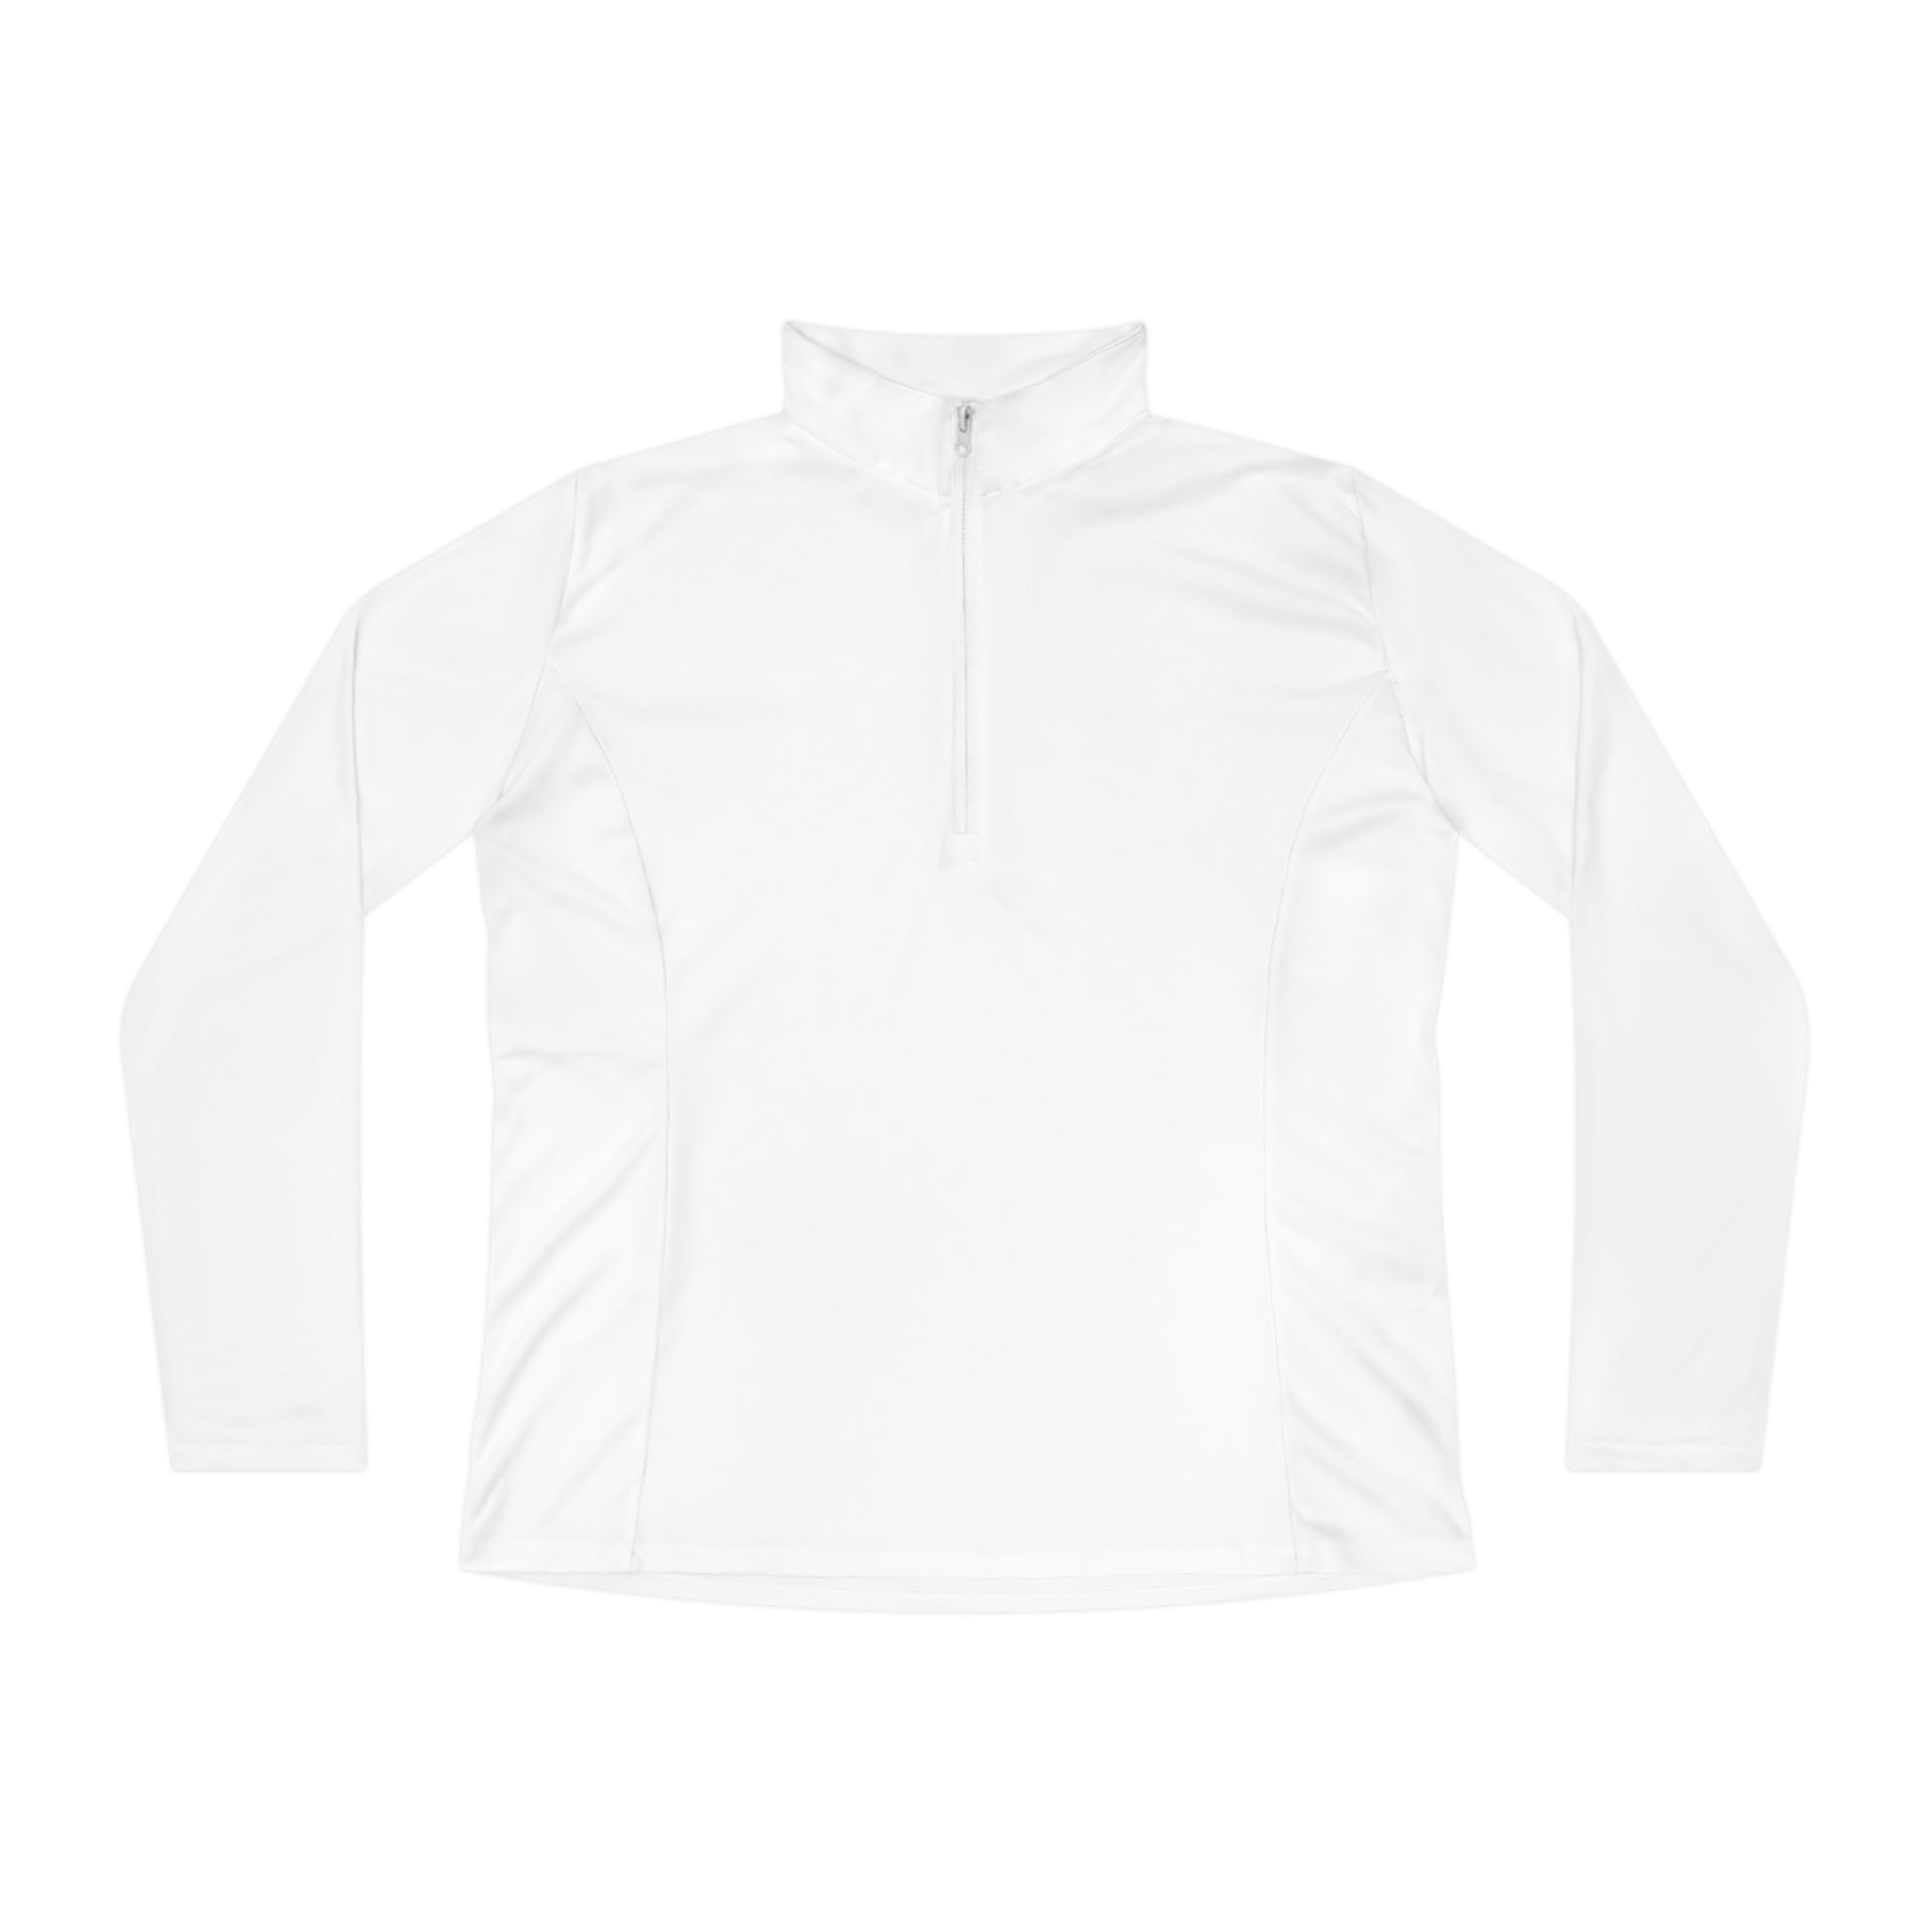 Women's Moisture Wicking Quarter-Zip Performance Pullover (Printed not Embroidered)